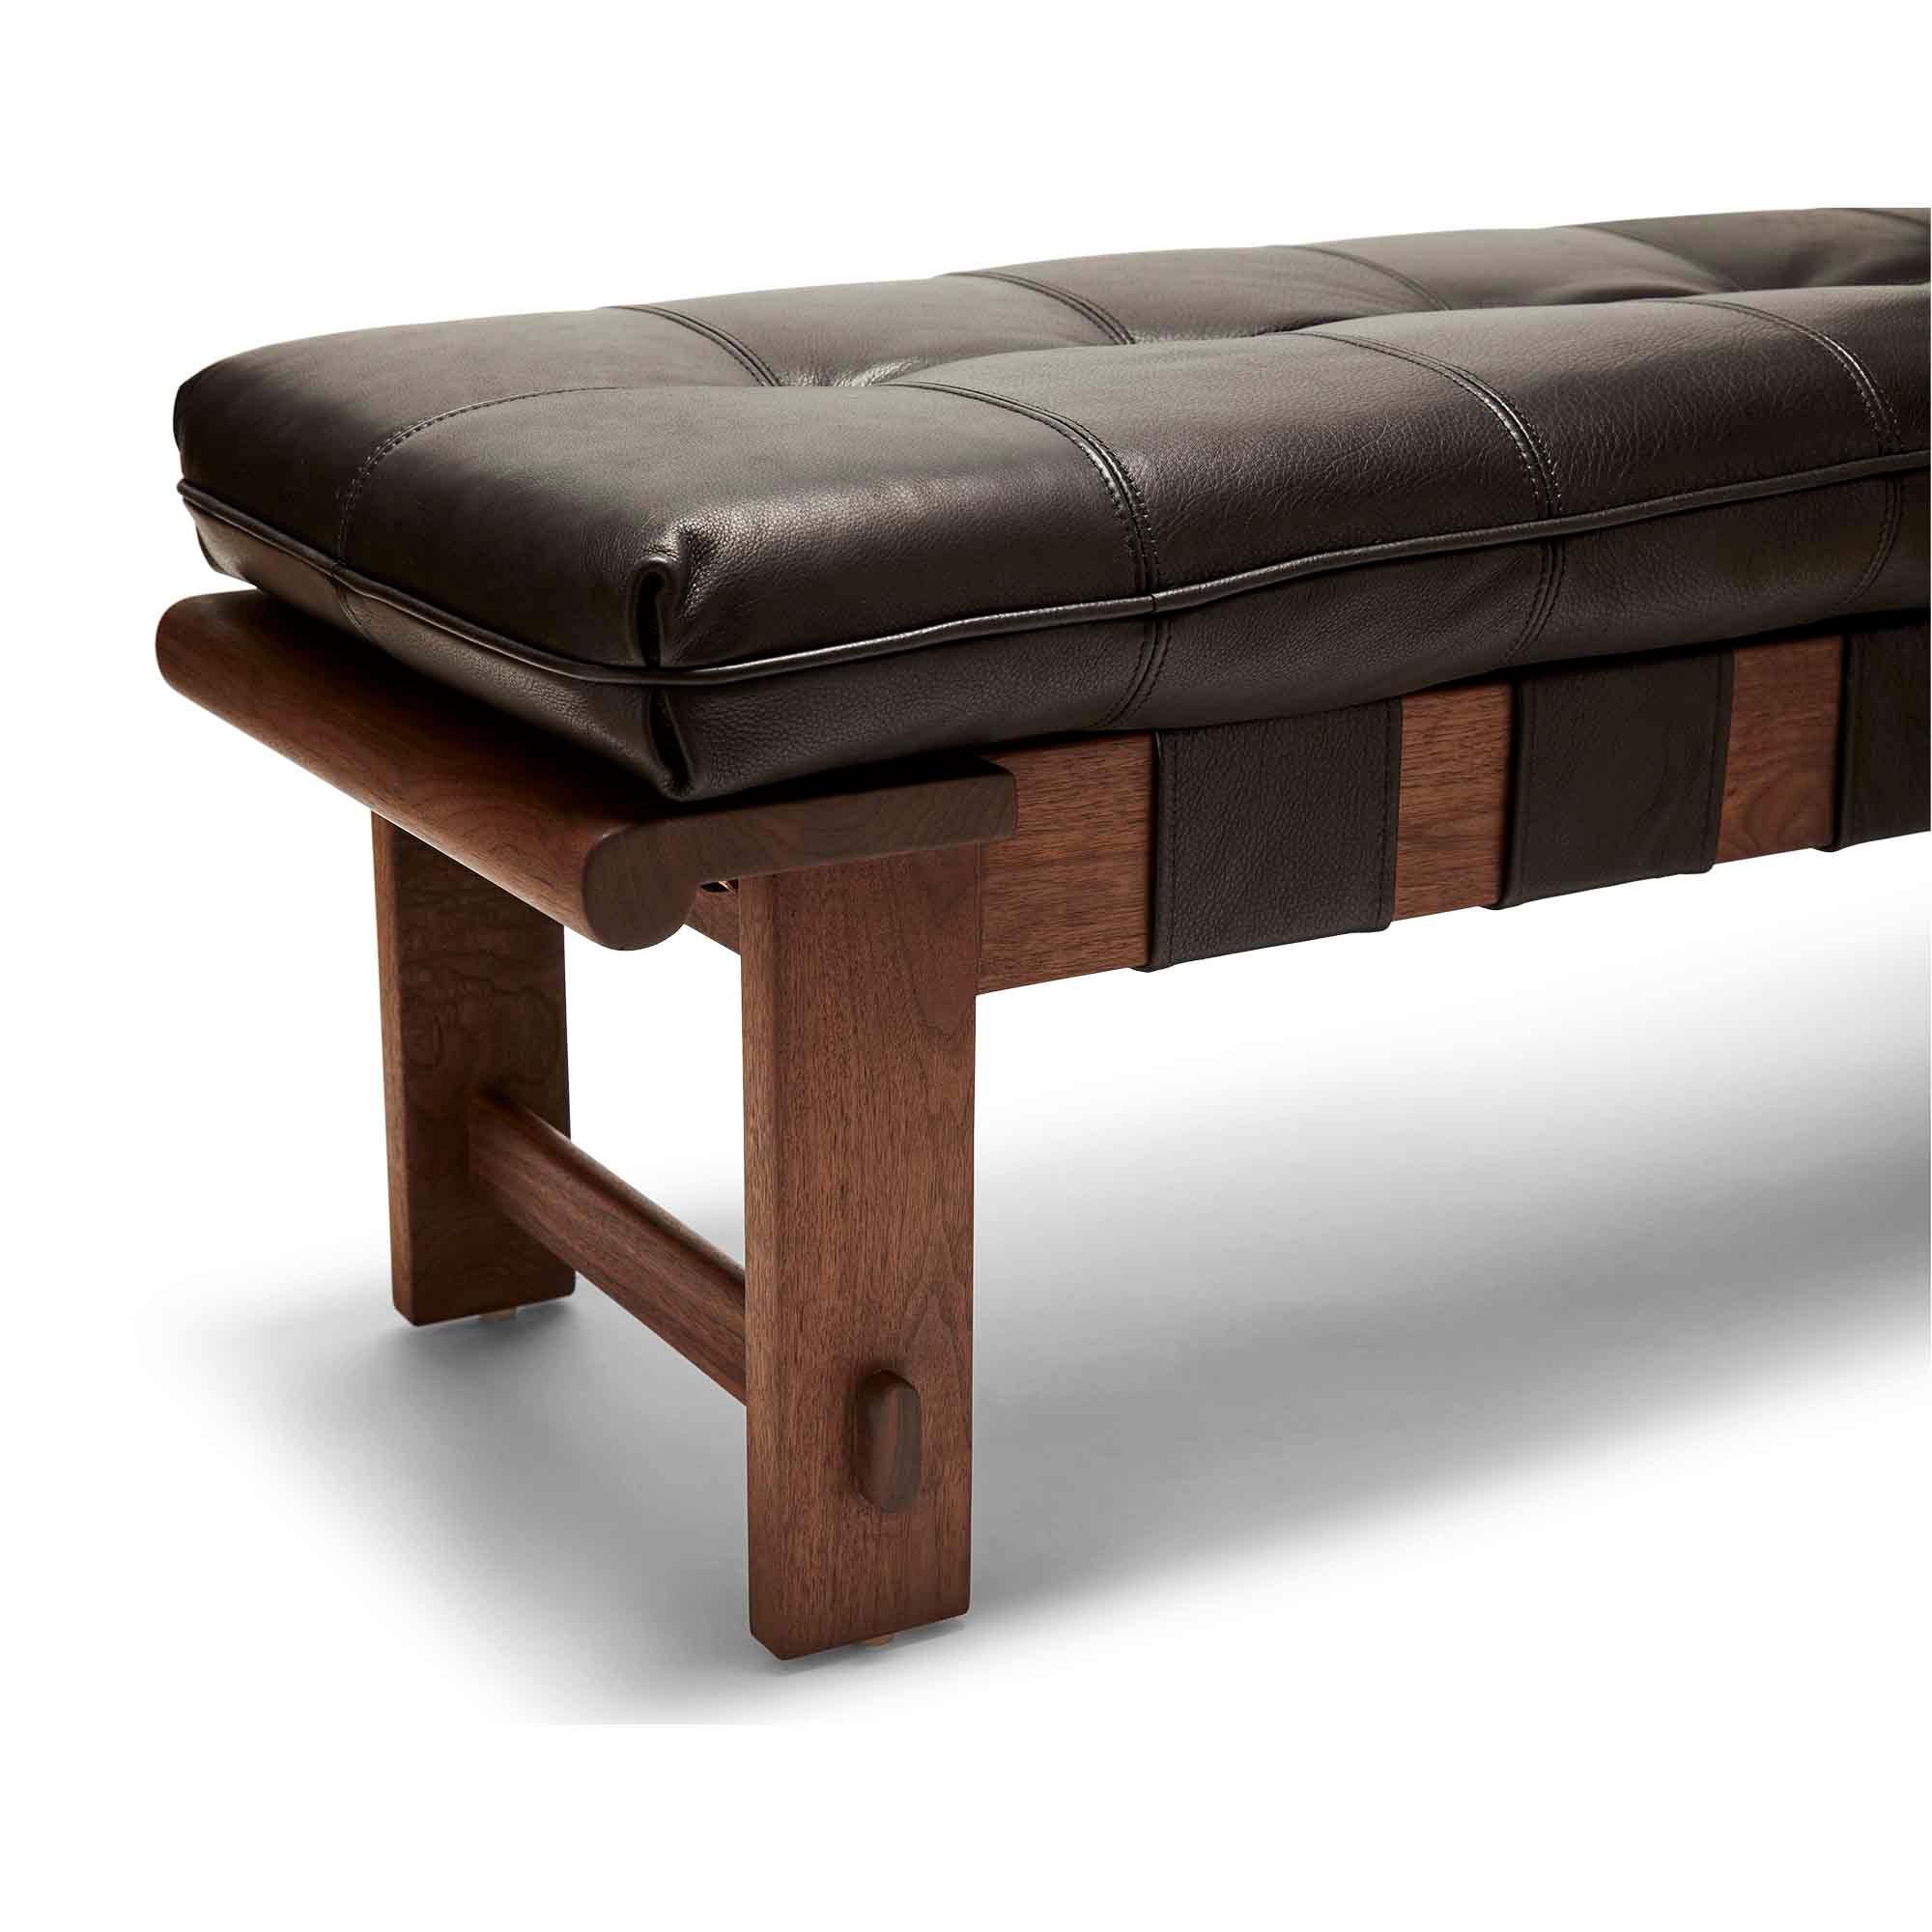 American Walnut and Black Leather Ojai Bench by Lawson-Fenning For Sale